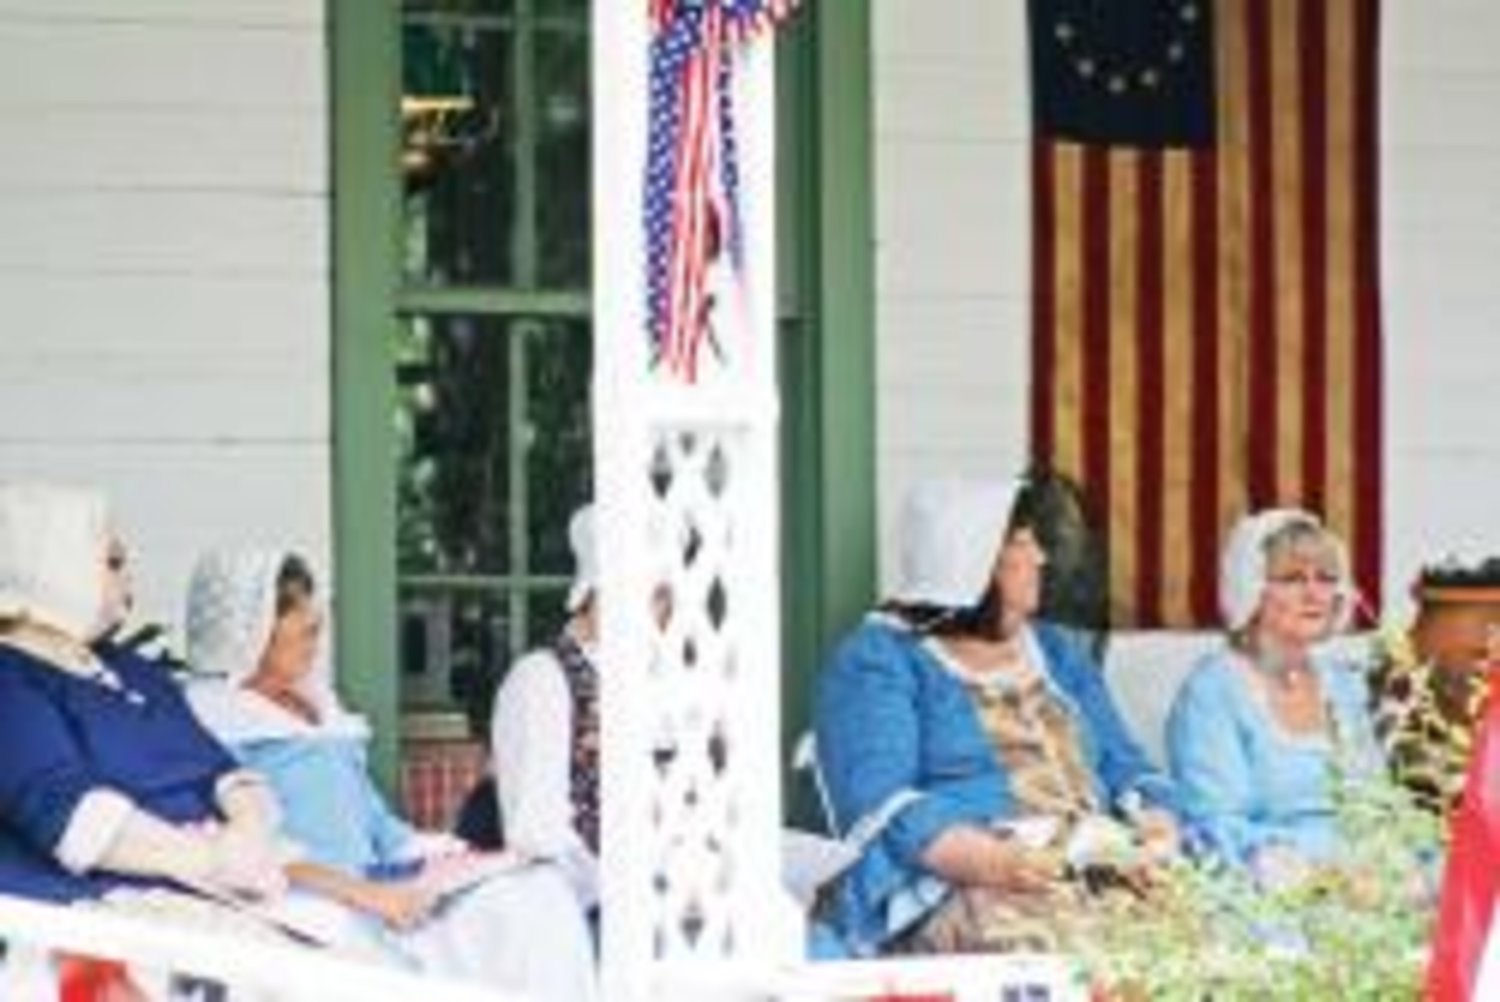 Members of the Daughters of the American Revolution were on hand in period dress for the July 4th festivities at the Stinson House in Jim Hogg City Park.